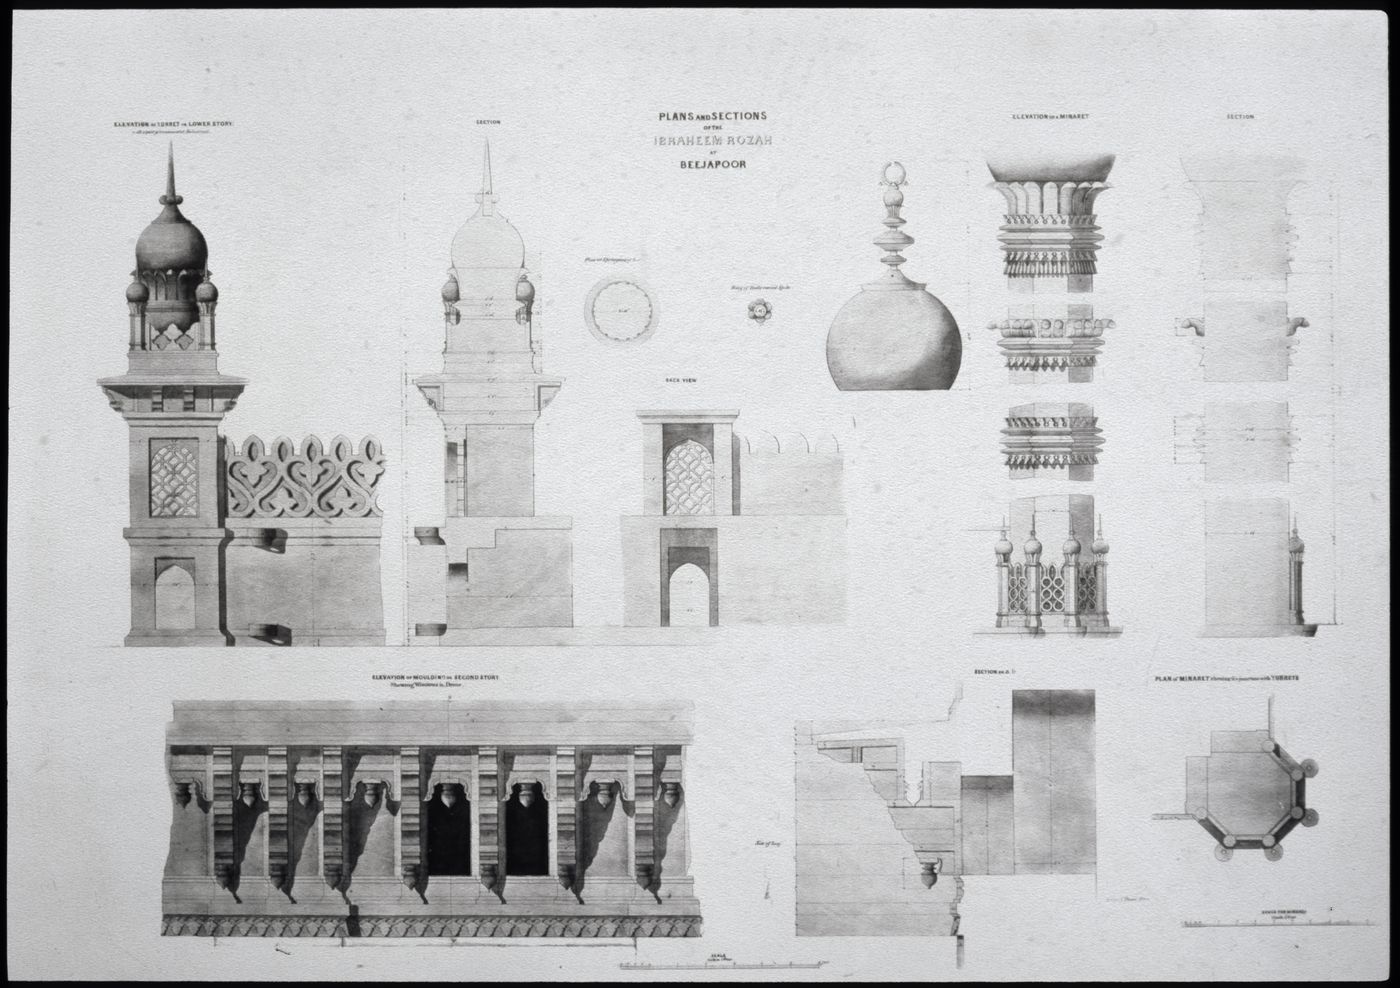 Photograph of plans, elevations and sections of minarets and mouldings of the Mausoleum of the Ibrahim Rauza, Beejapore (now Bijapur), India